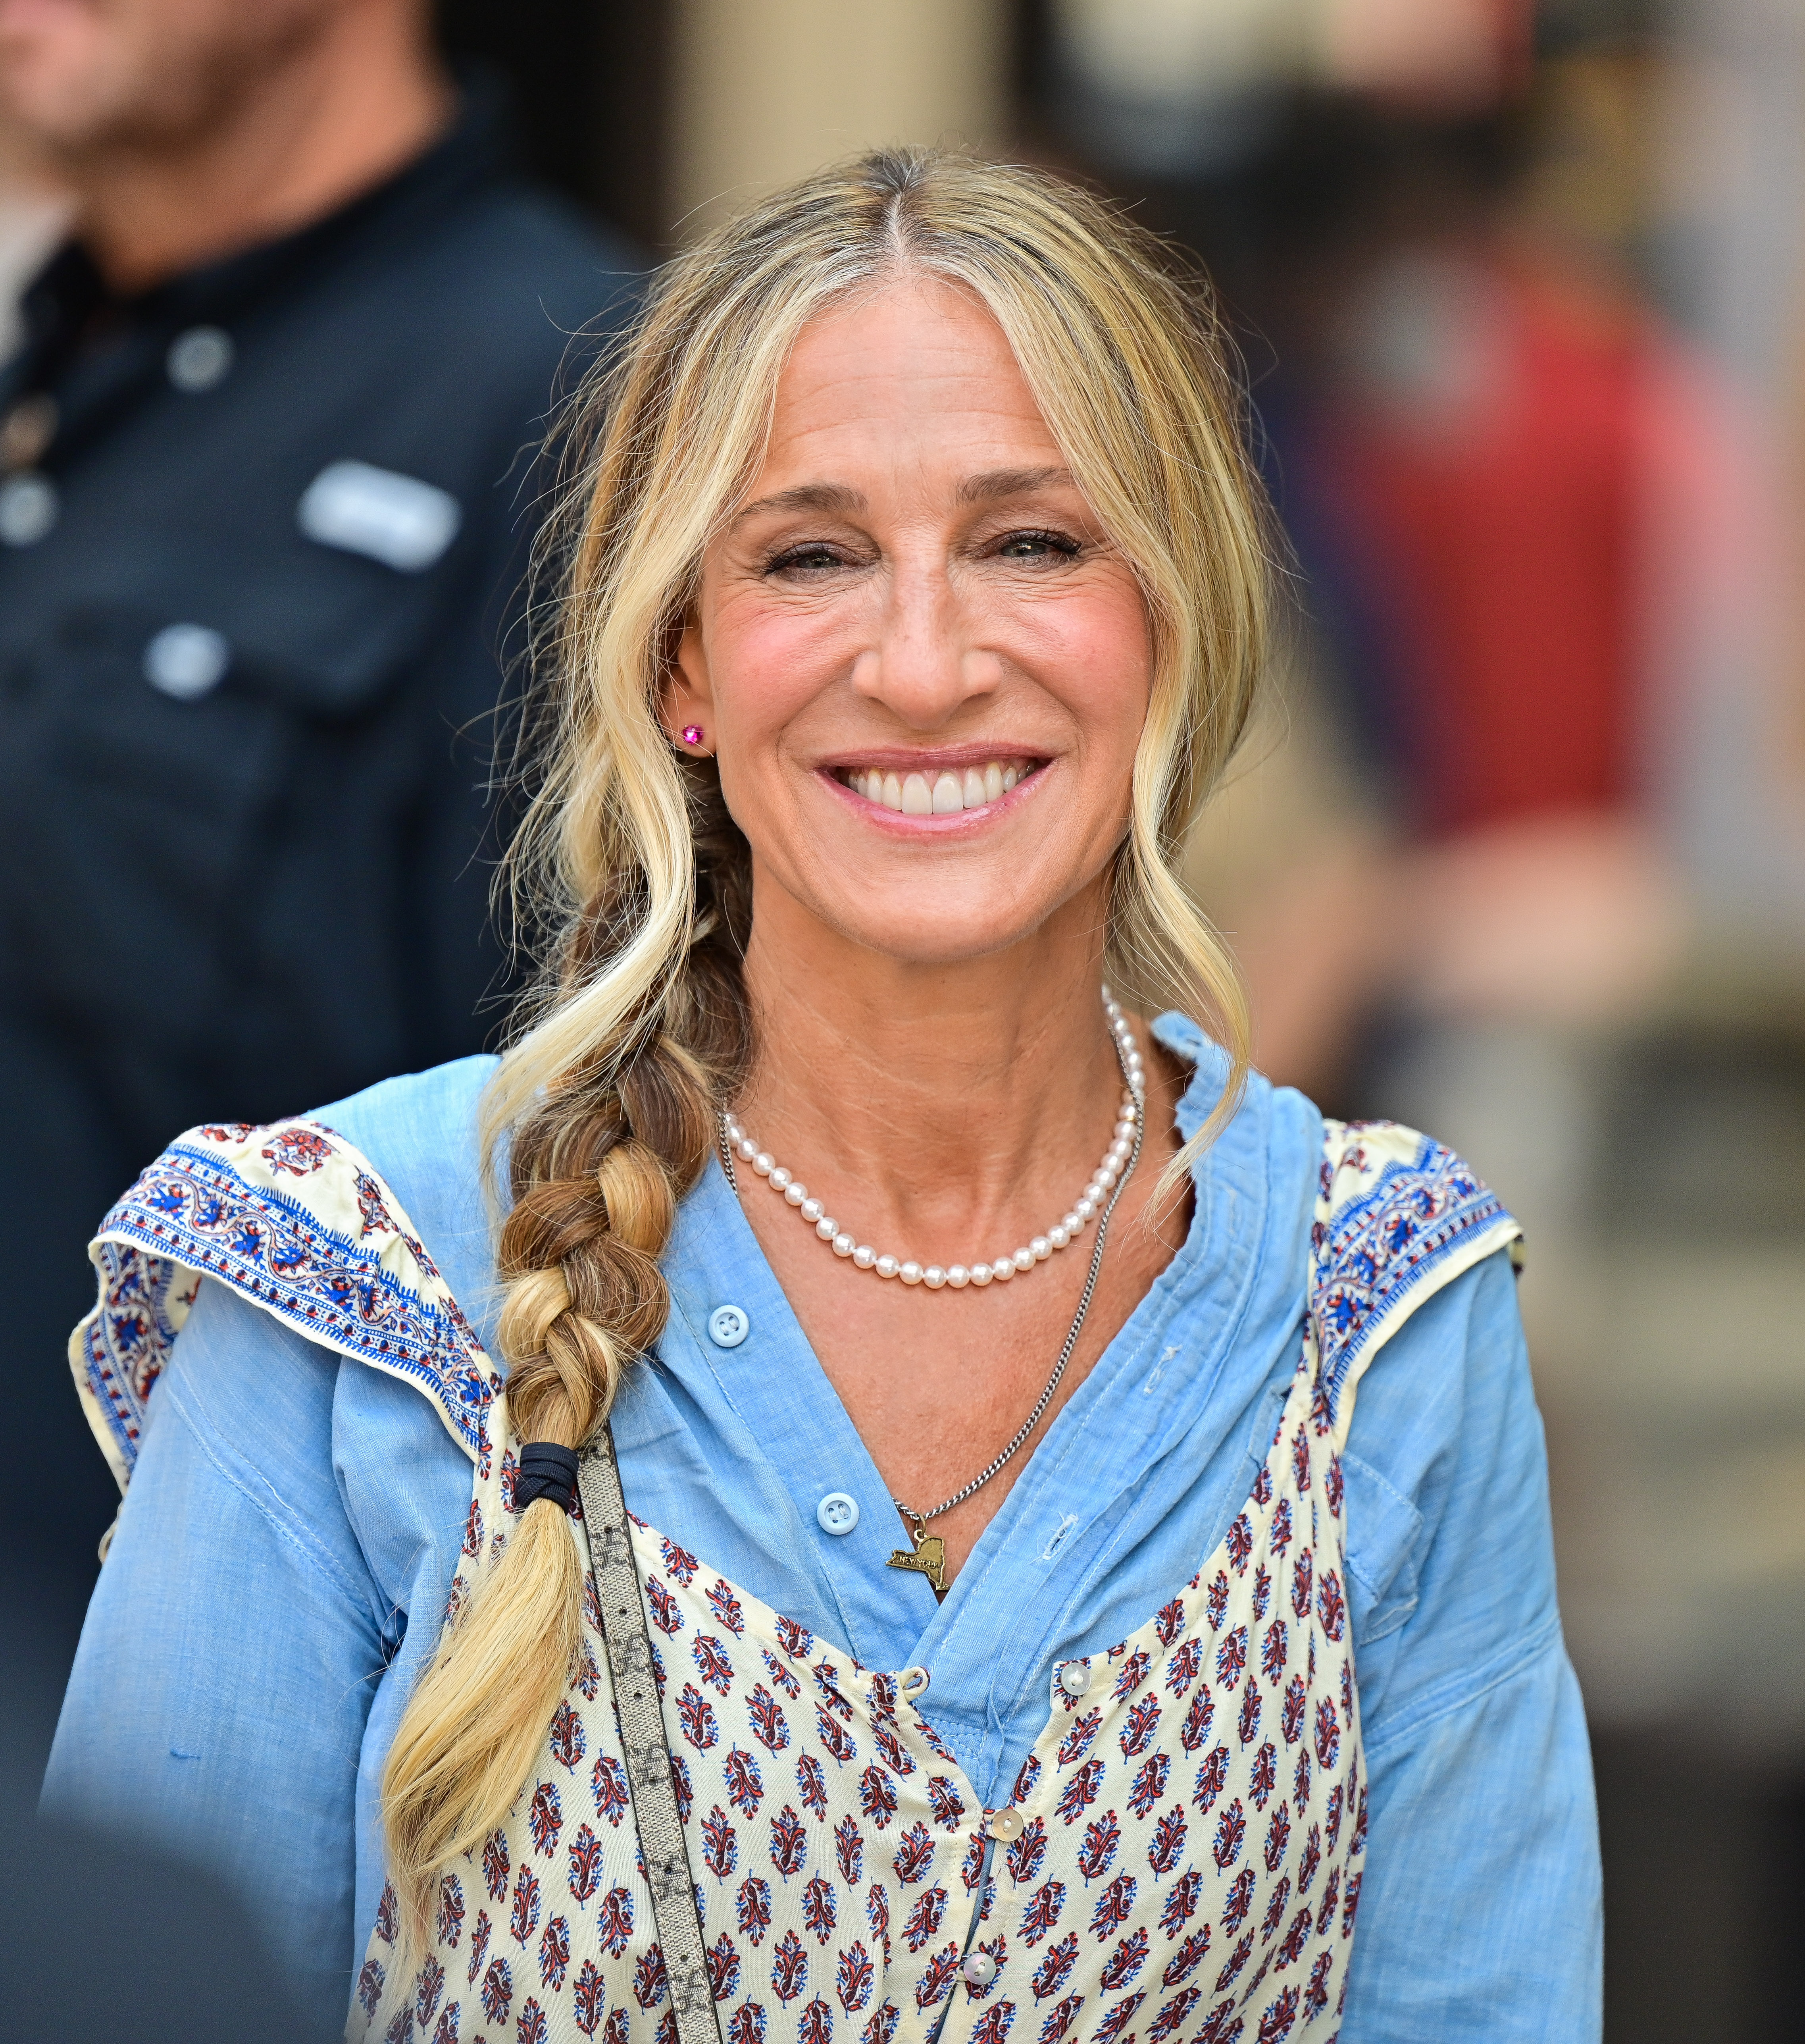 Sarah Jessica Parker on the set of "And Just Like That..." in New York in 2021 | Source: Getty Images